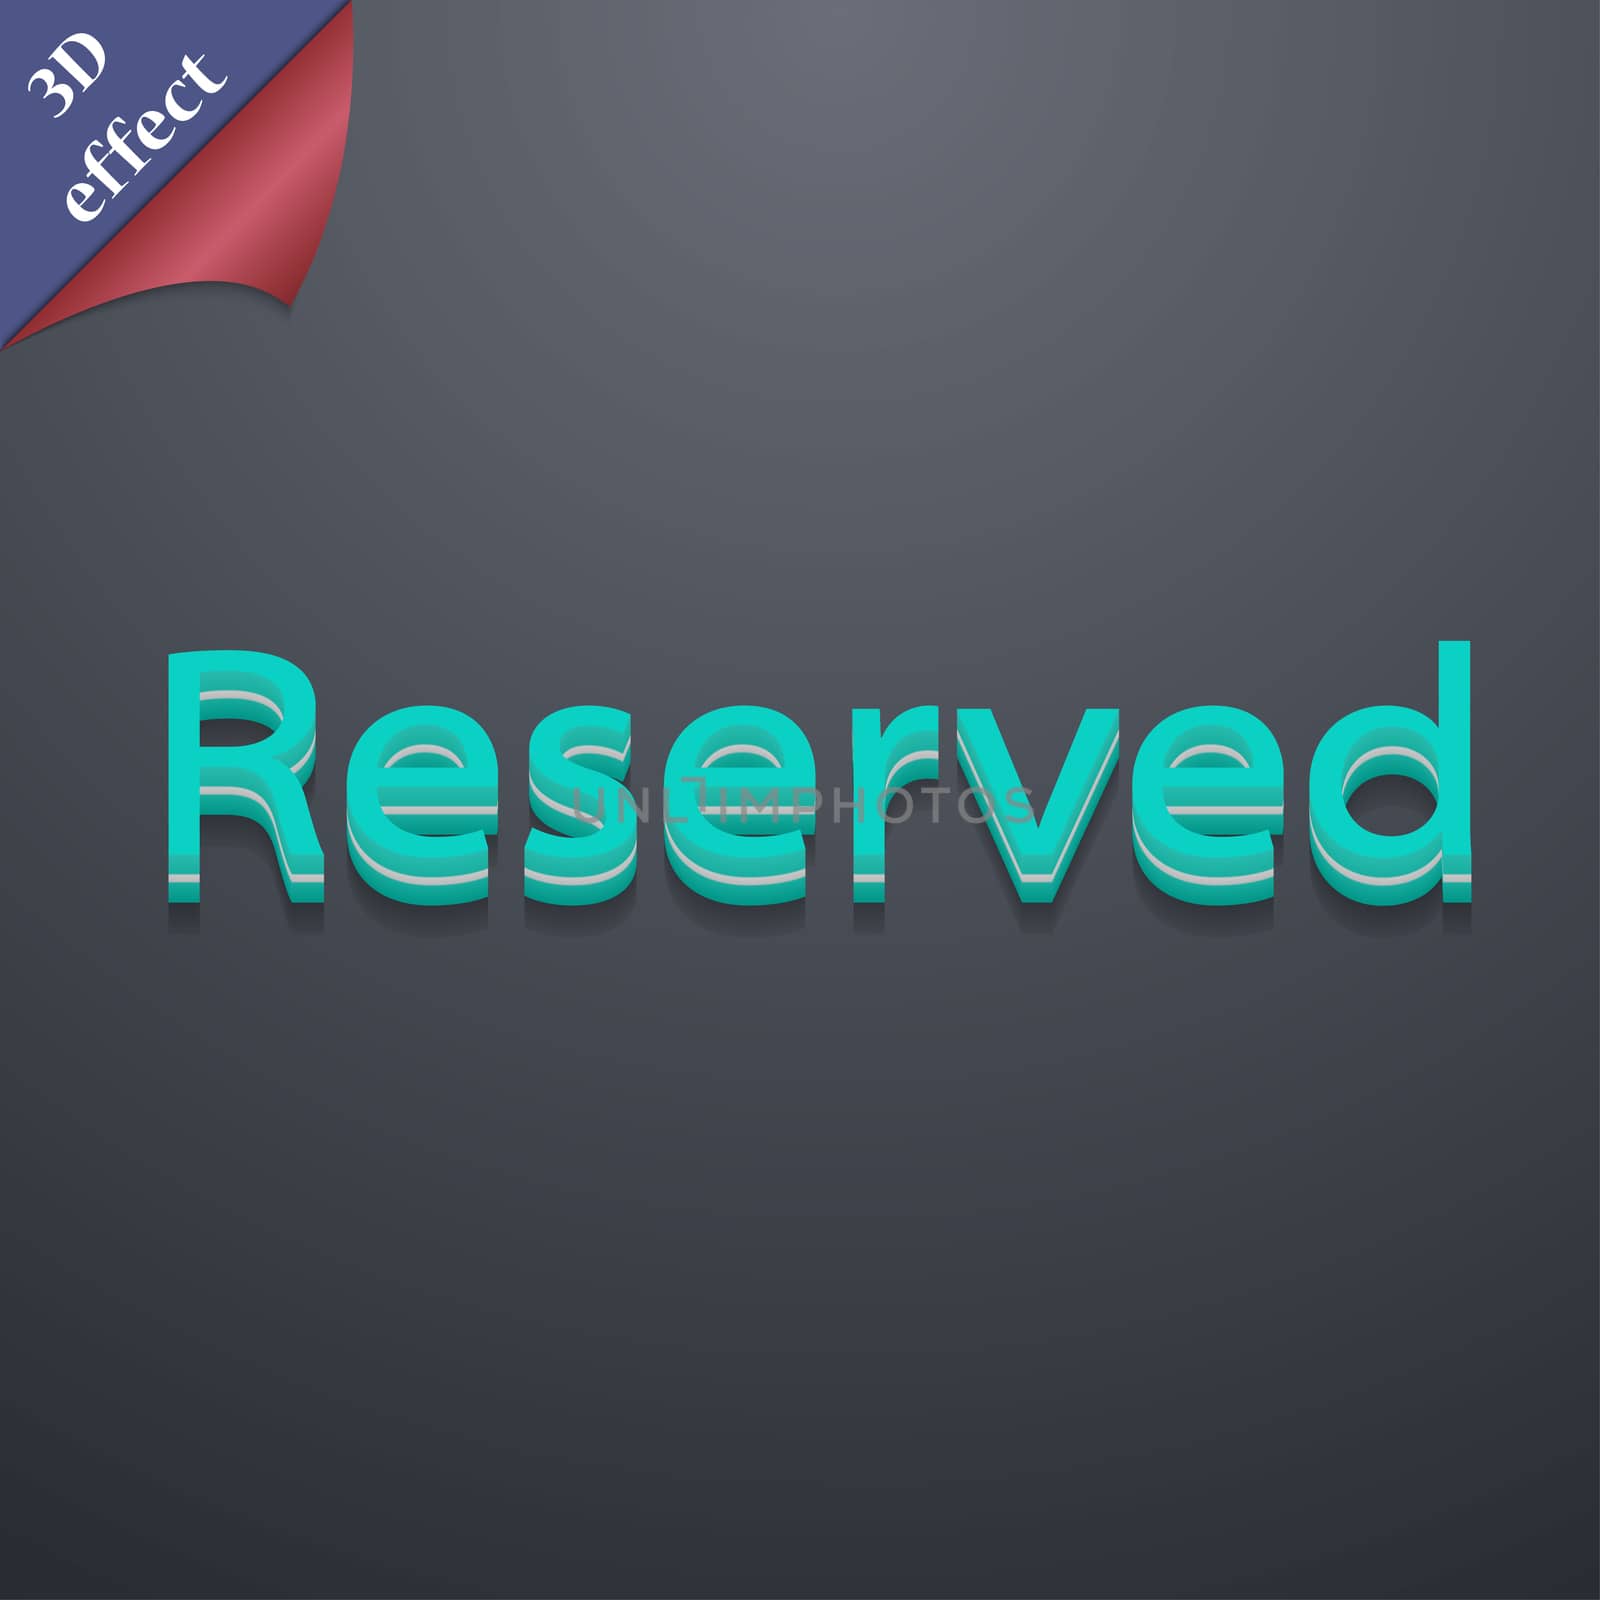 Reserved icon symbol. 3D style. Trendy, modern design with space for your text illustration. Rastrized copy